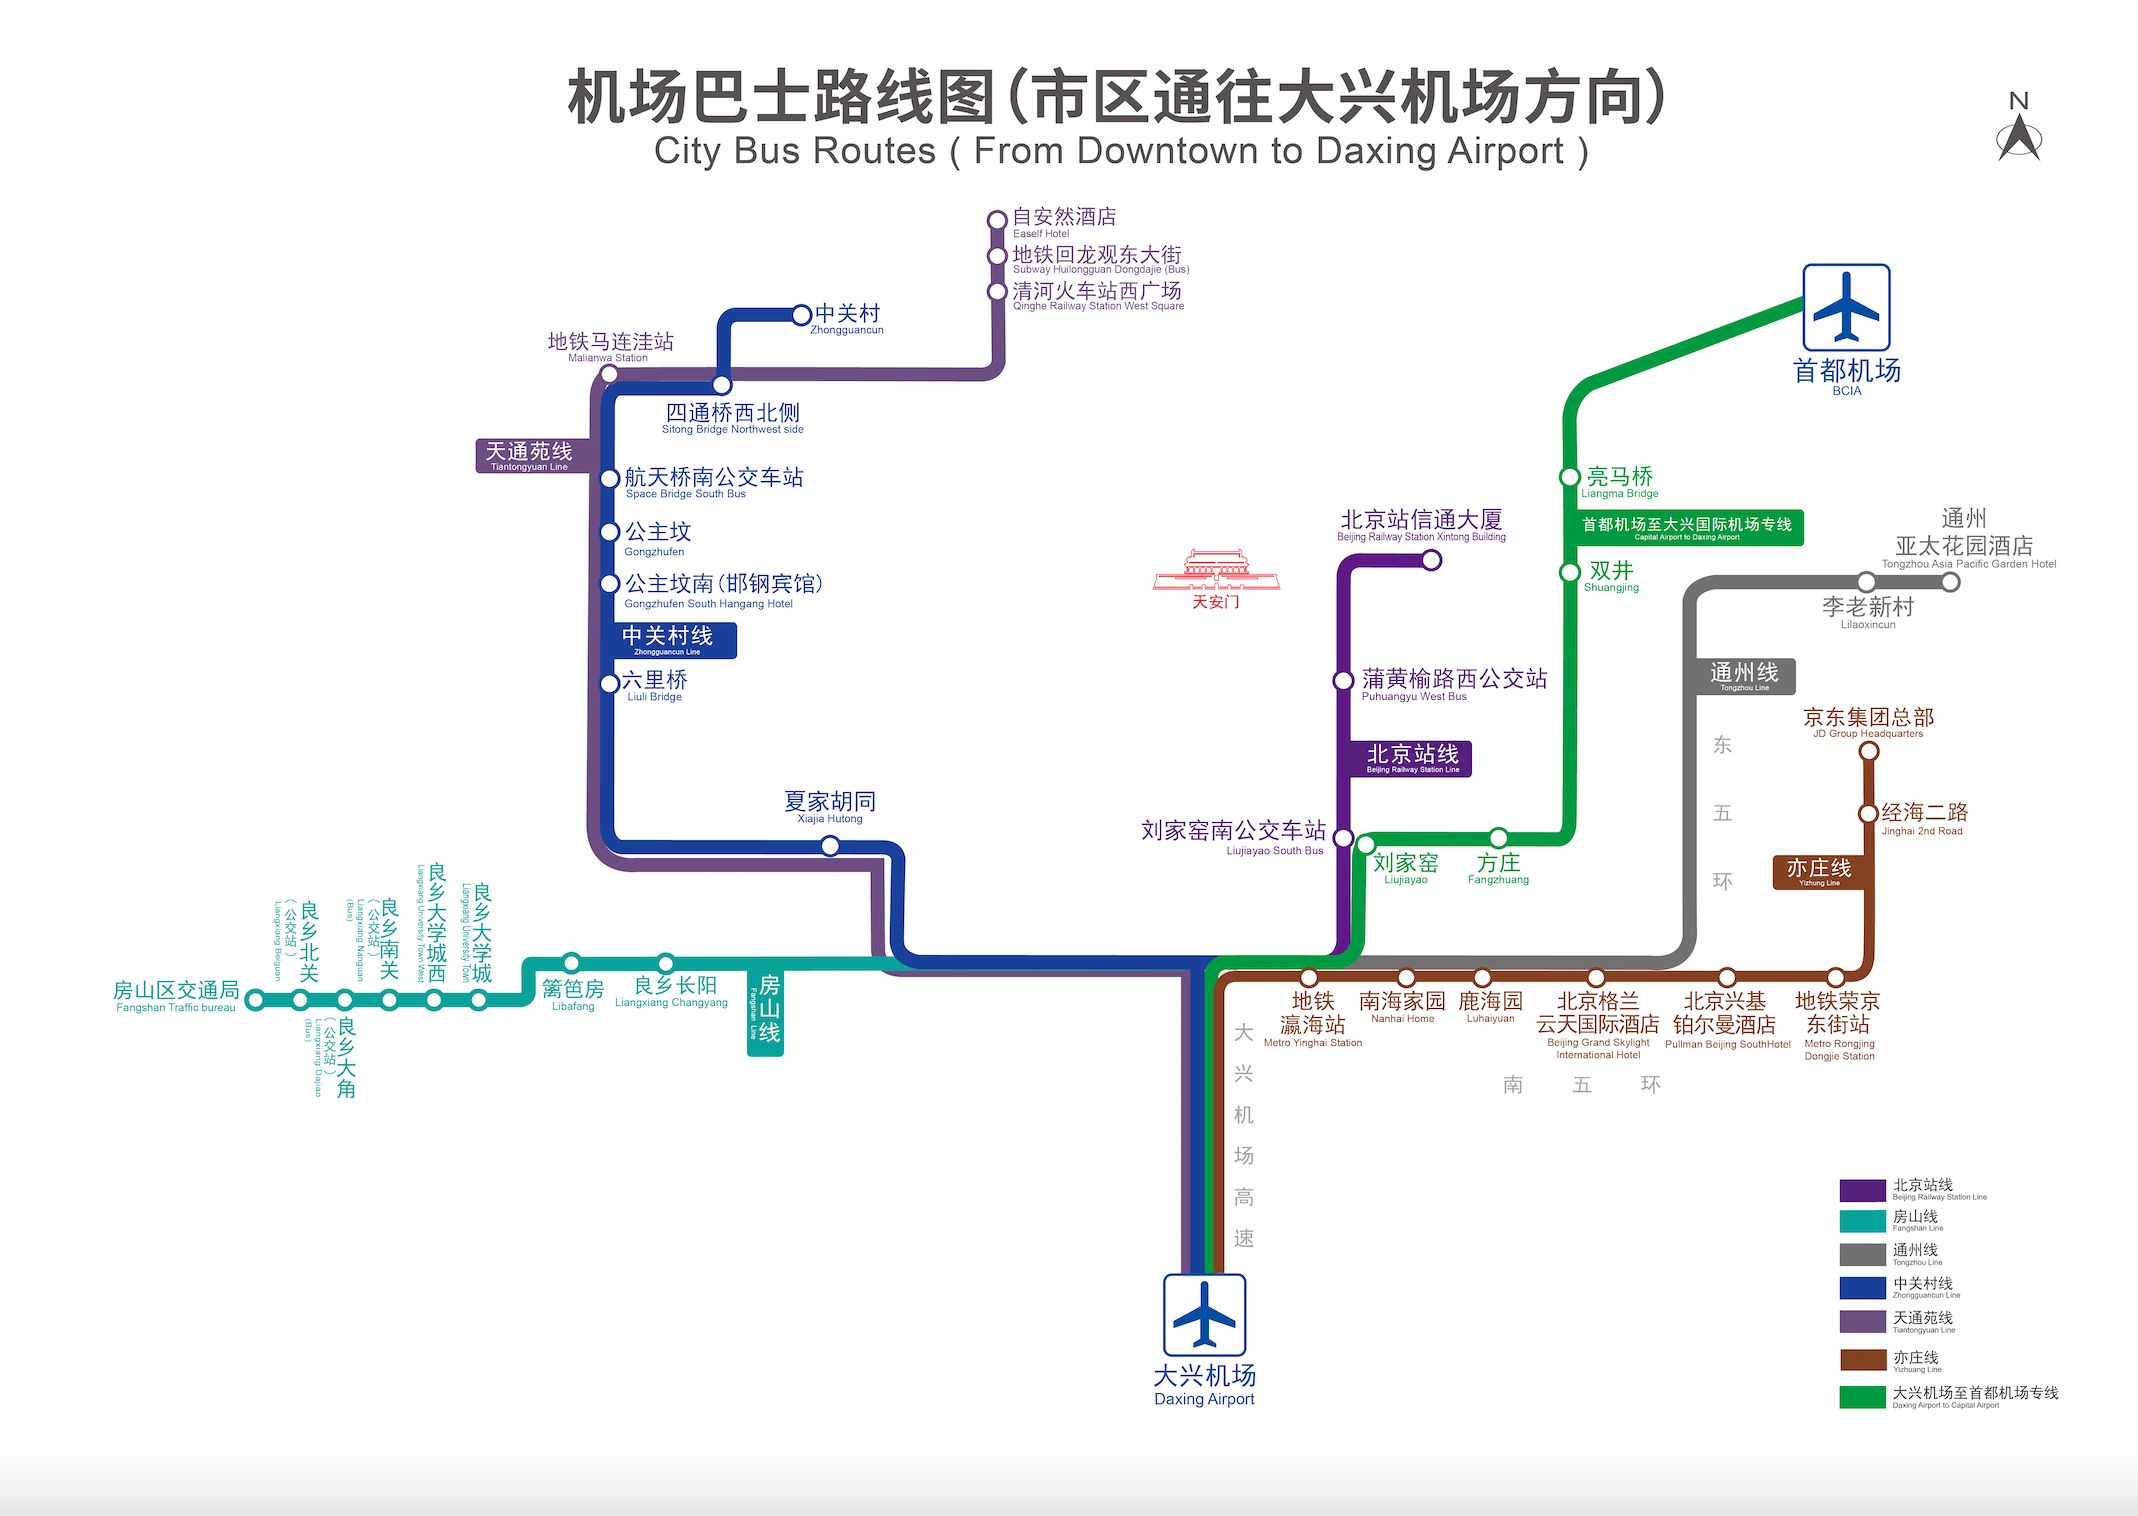 City Bus Routes(From Downtown to Daxing Airport)